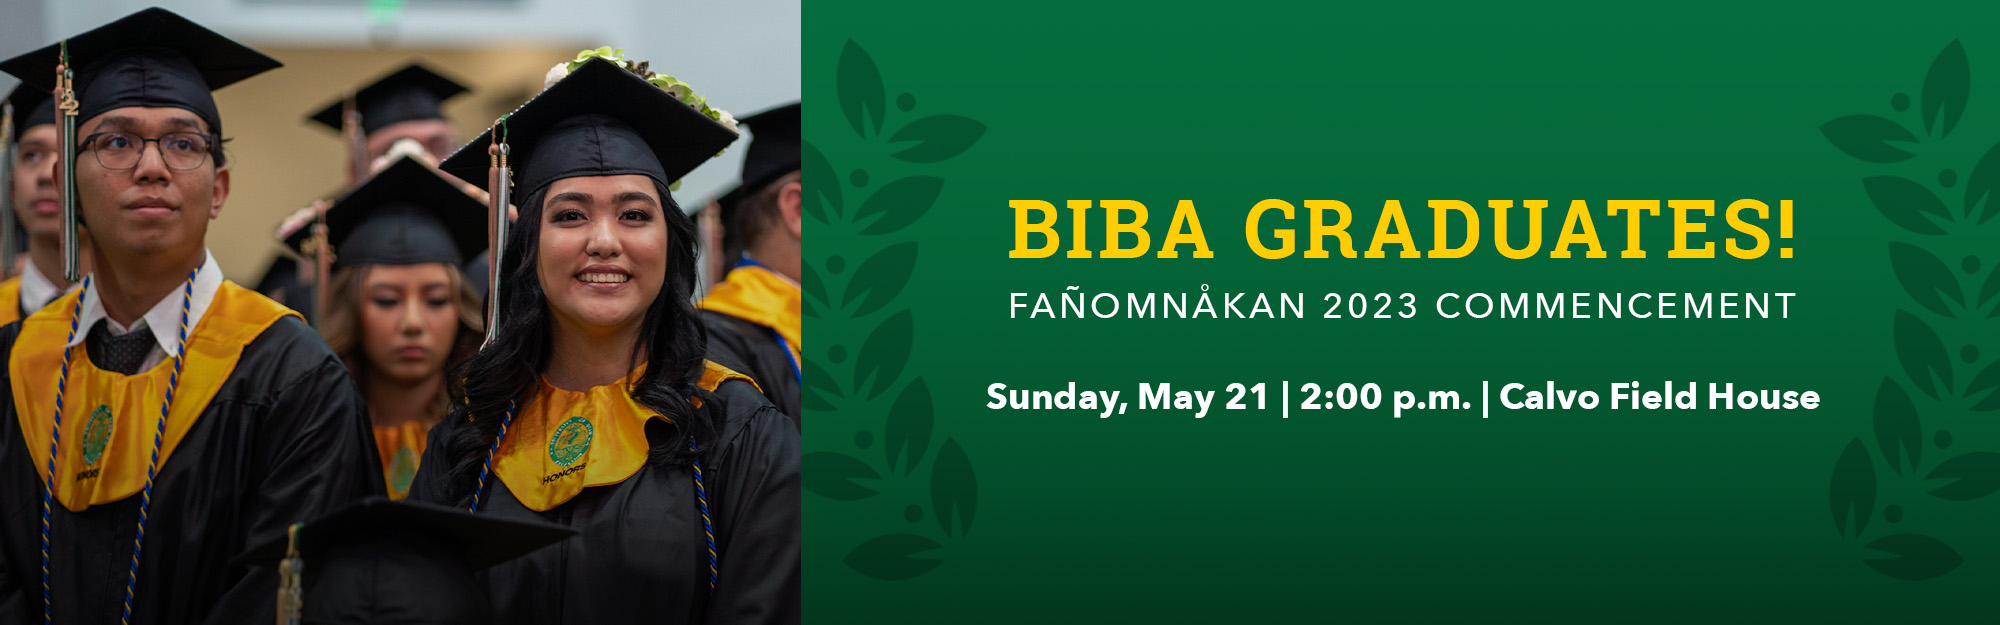 Biba Graduates! Fañomnåkan 2023 Commencement on Sunday, May 21 at 2 p.m. in the Calvo Filed House